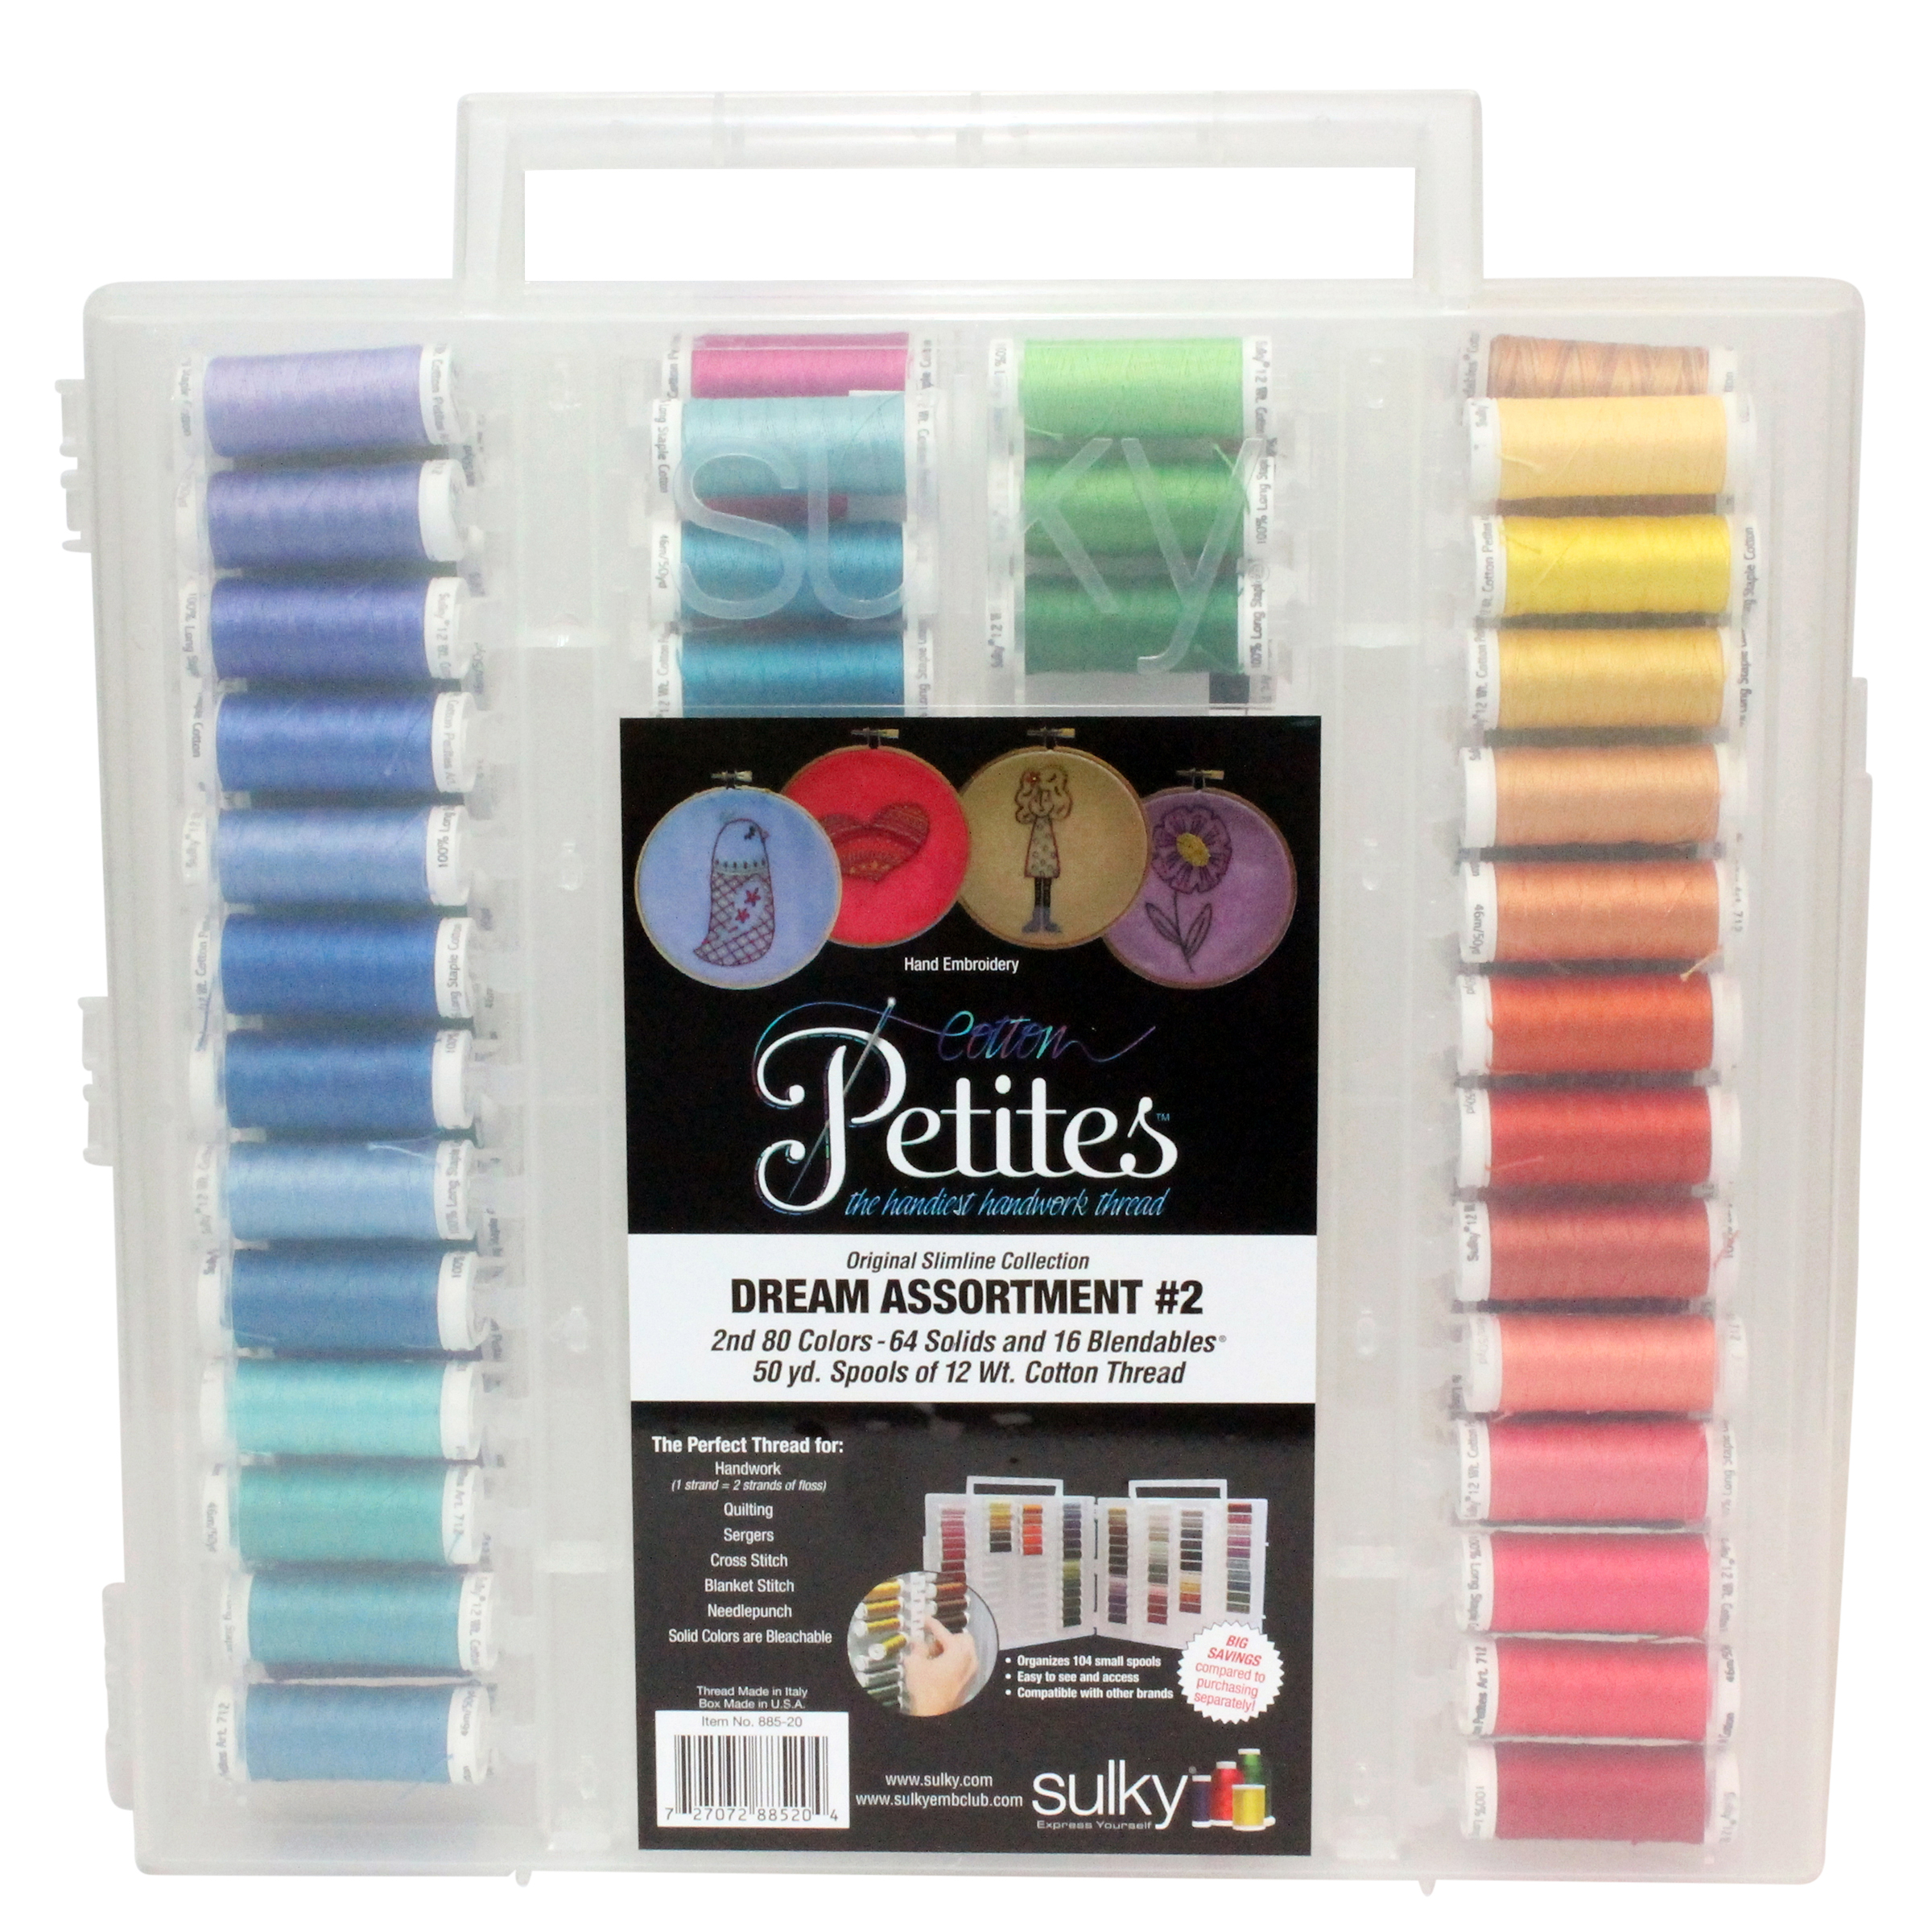 Original Slimline Thread Storage Box - 12 Wt. Cotton Petites Thread Dream Collection - 2nd 80 Colors Questions & Answers